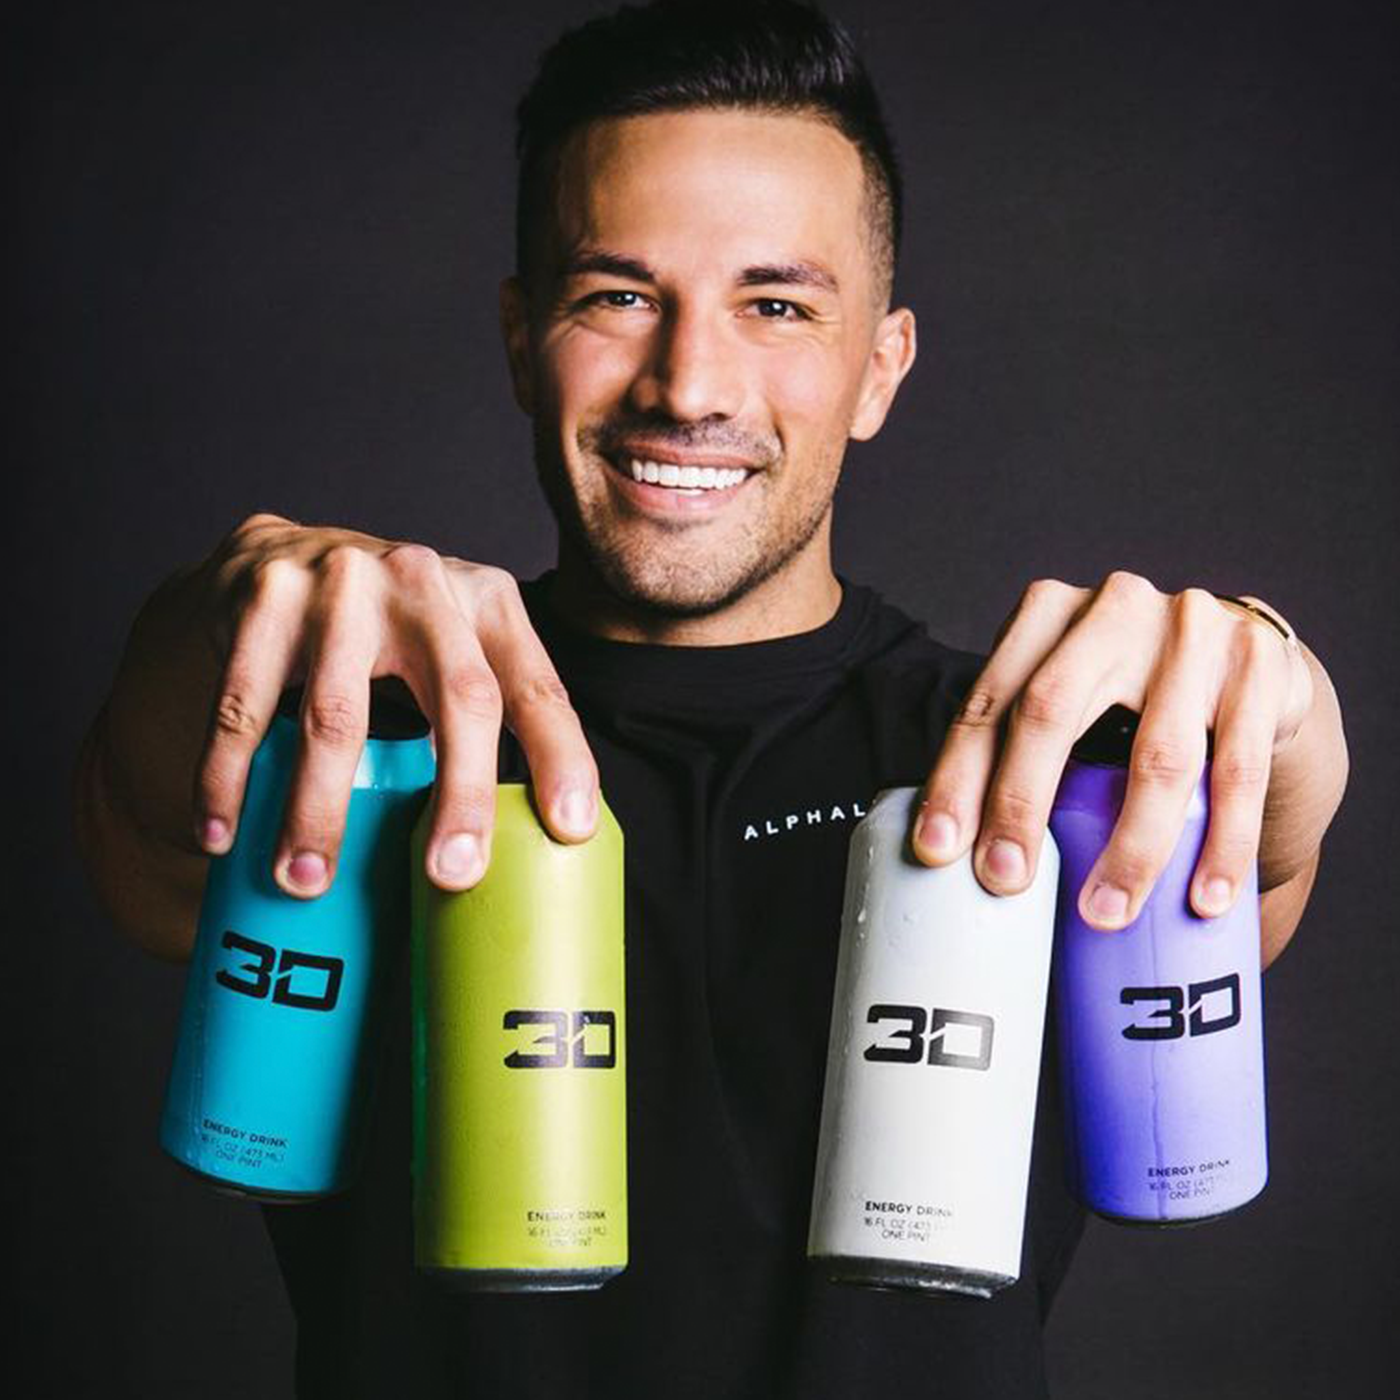 Christian smiling and holding a variety of 3D energy drinks by displaying them in front of him.